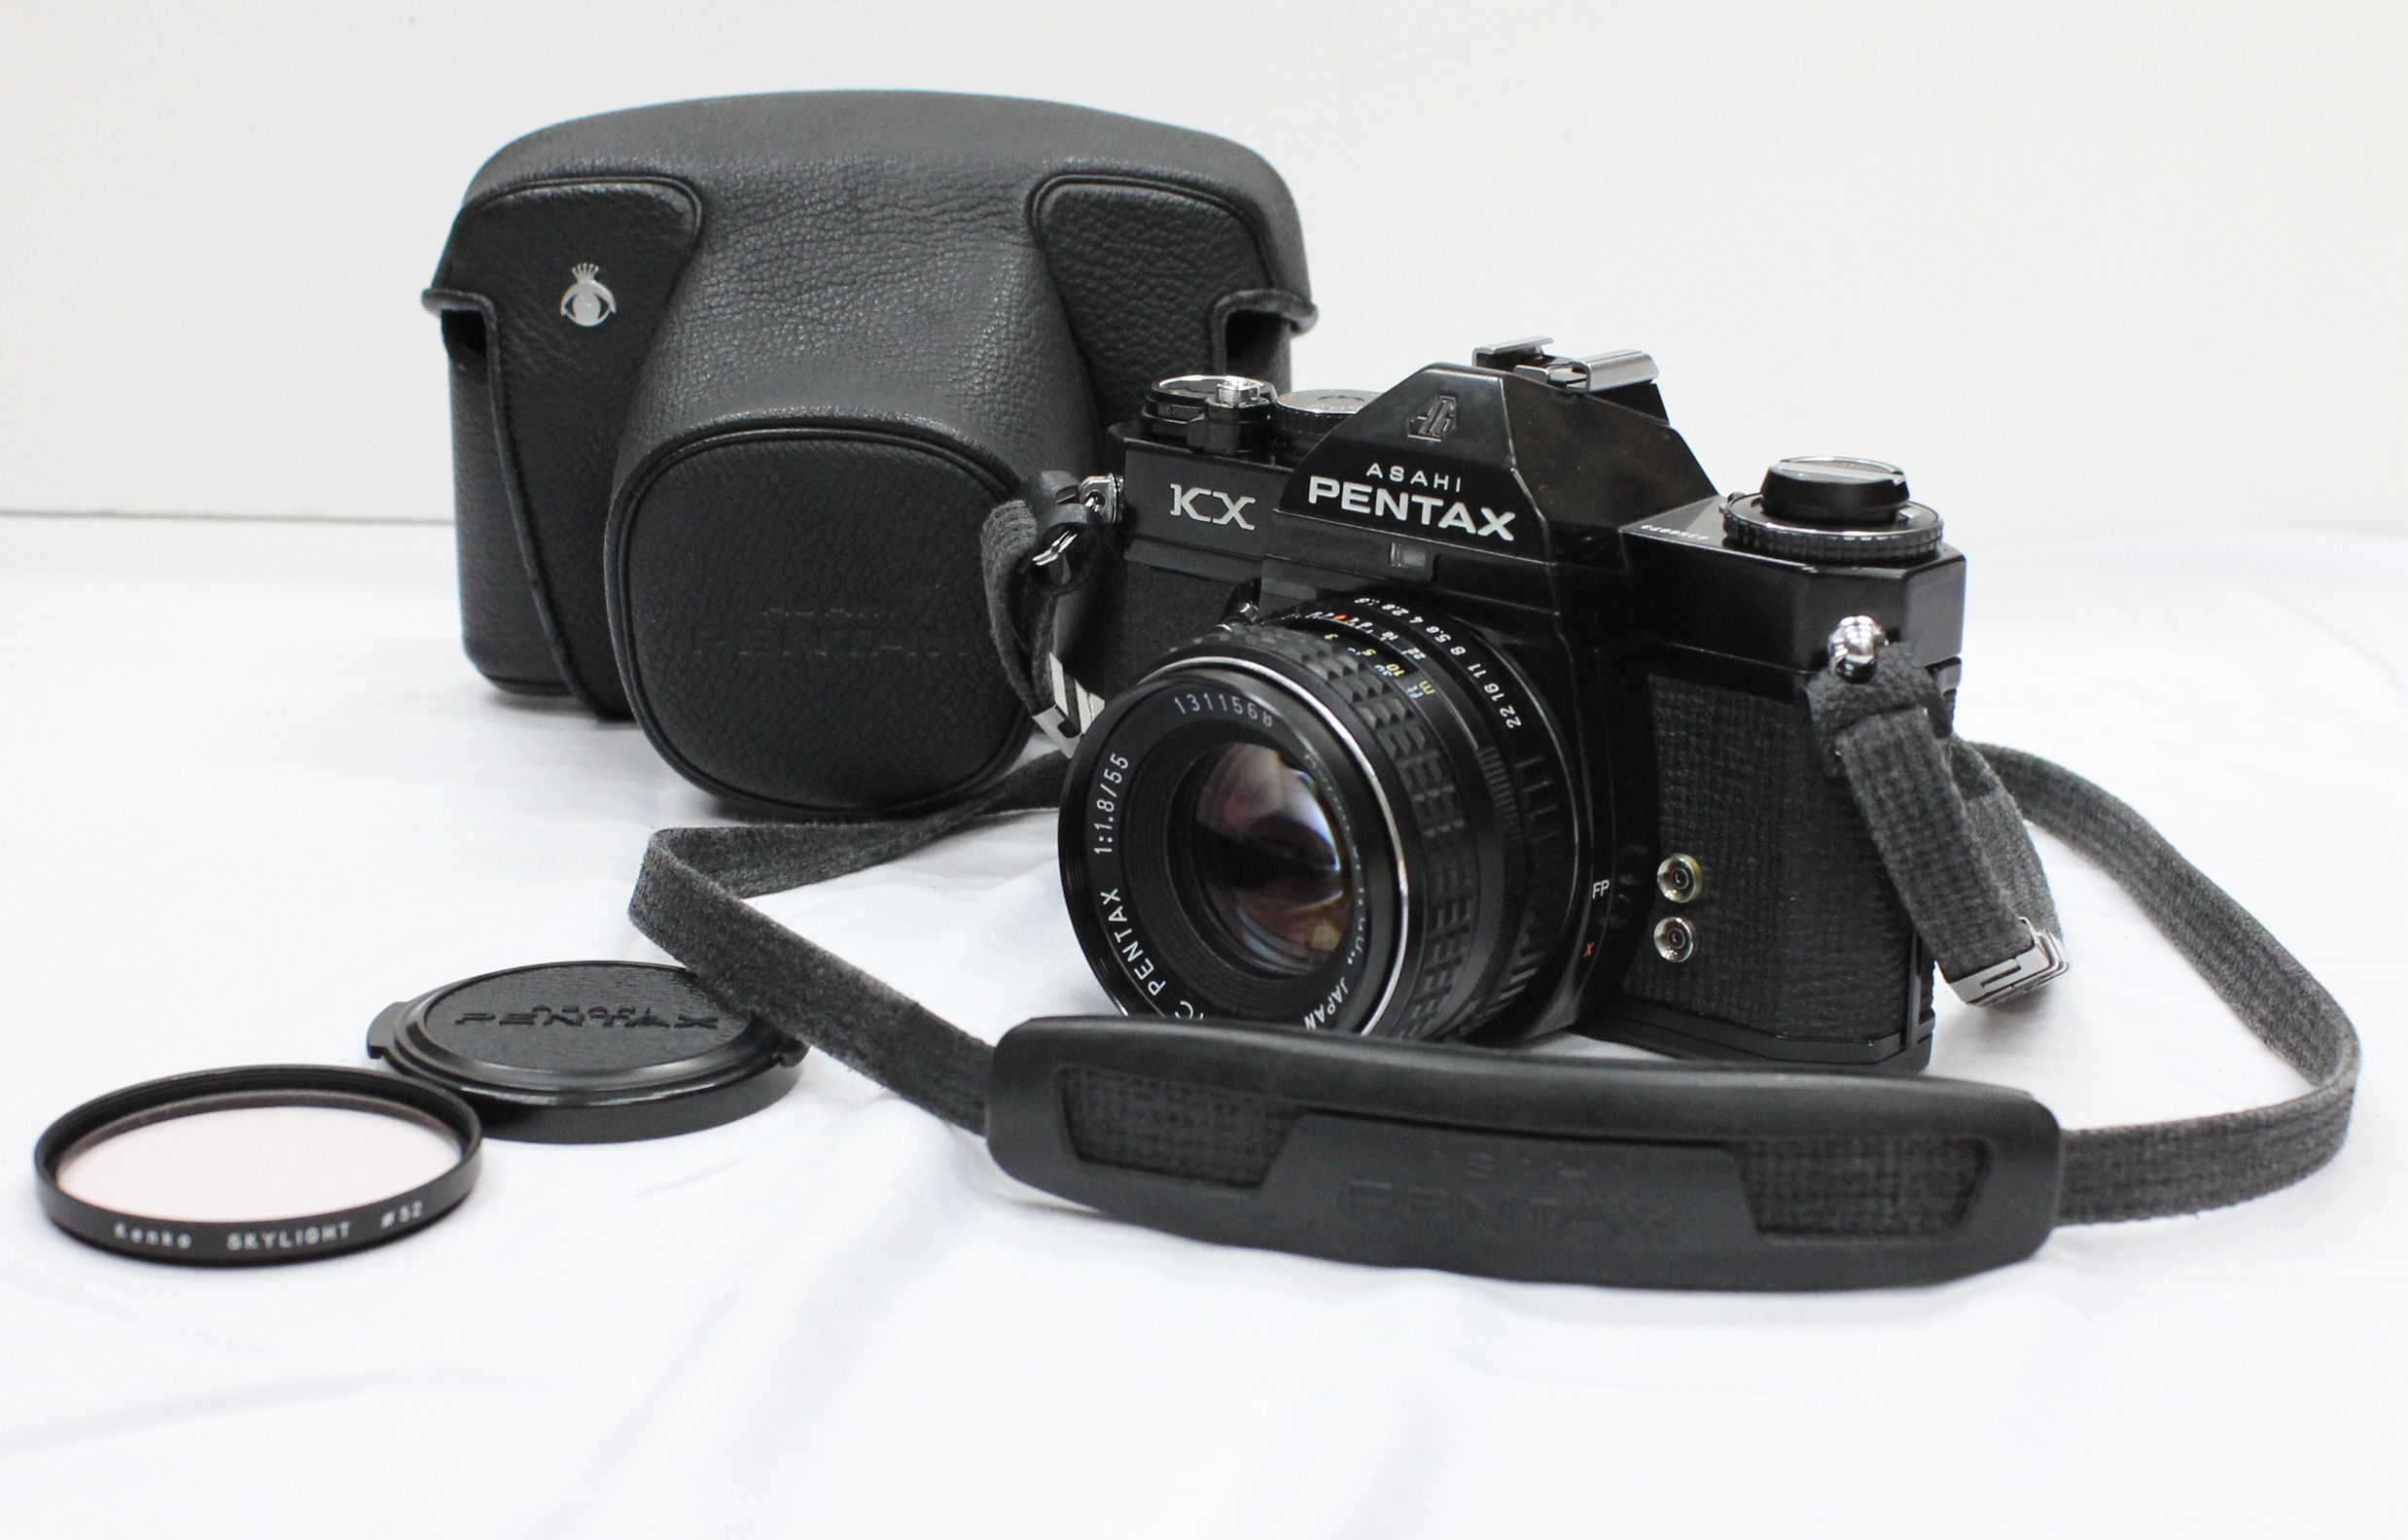 [EX+++++] Pentax KX Body with SMC PENTAX 55mm F/1.8 Lens and Filter, Camera Case and Strap from Japan